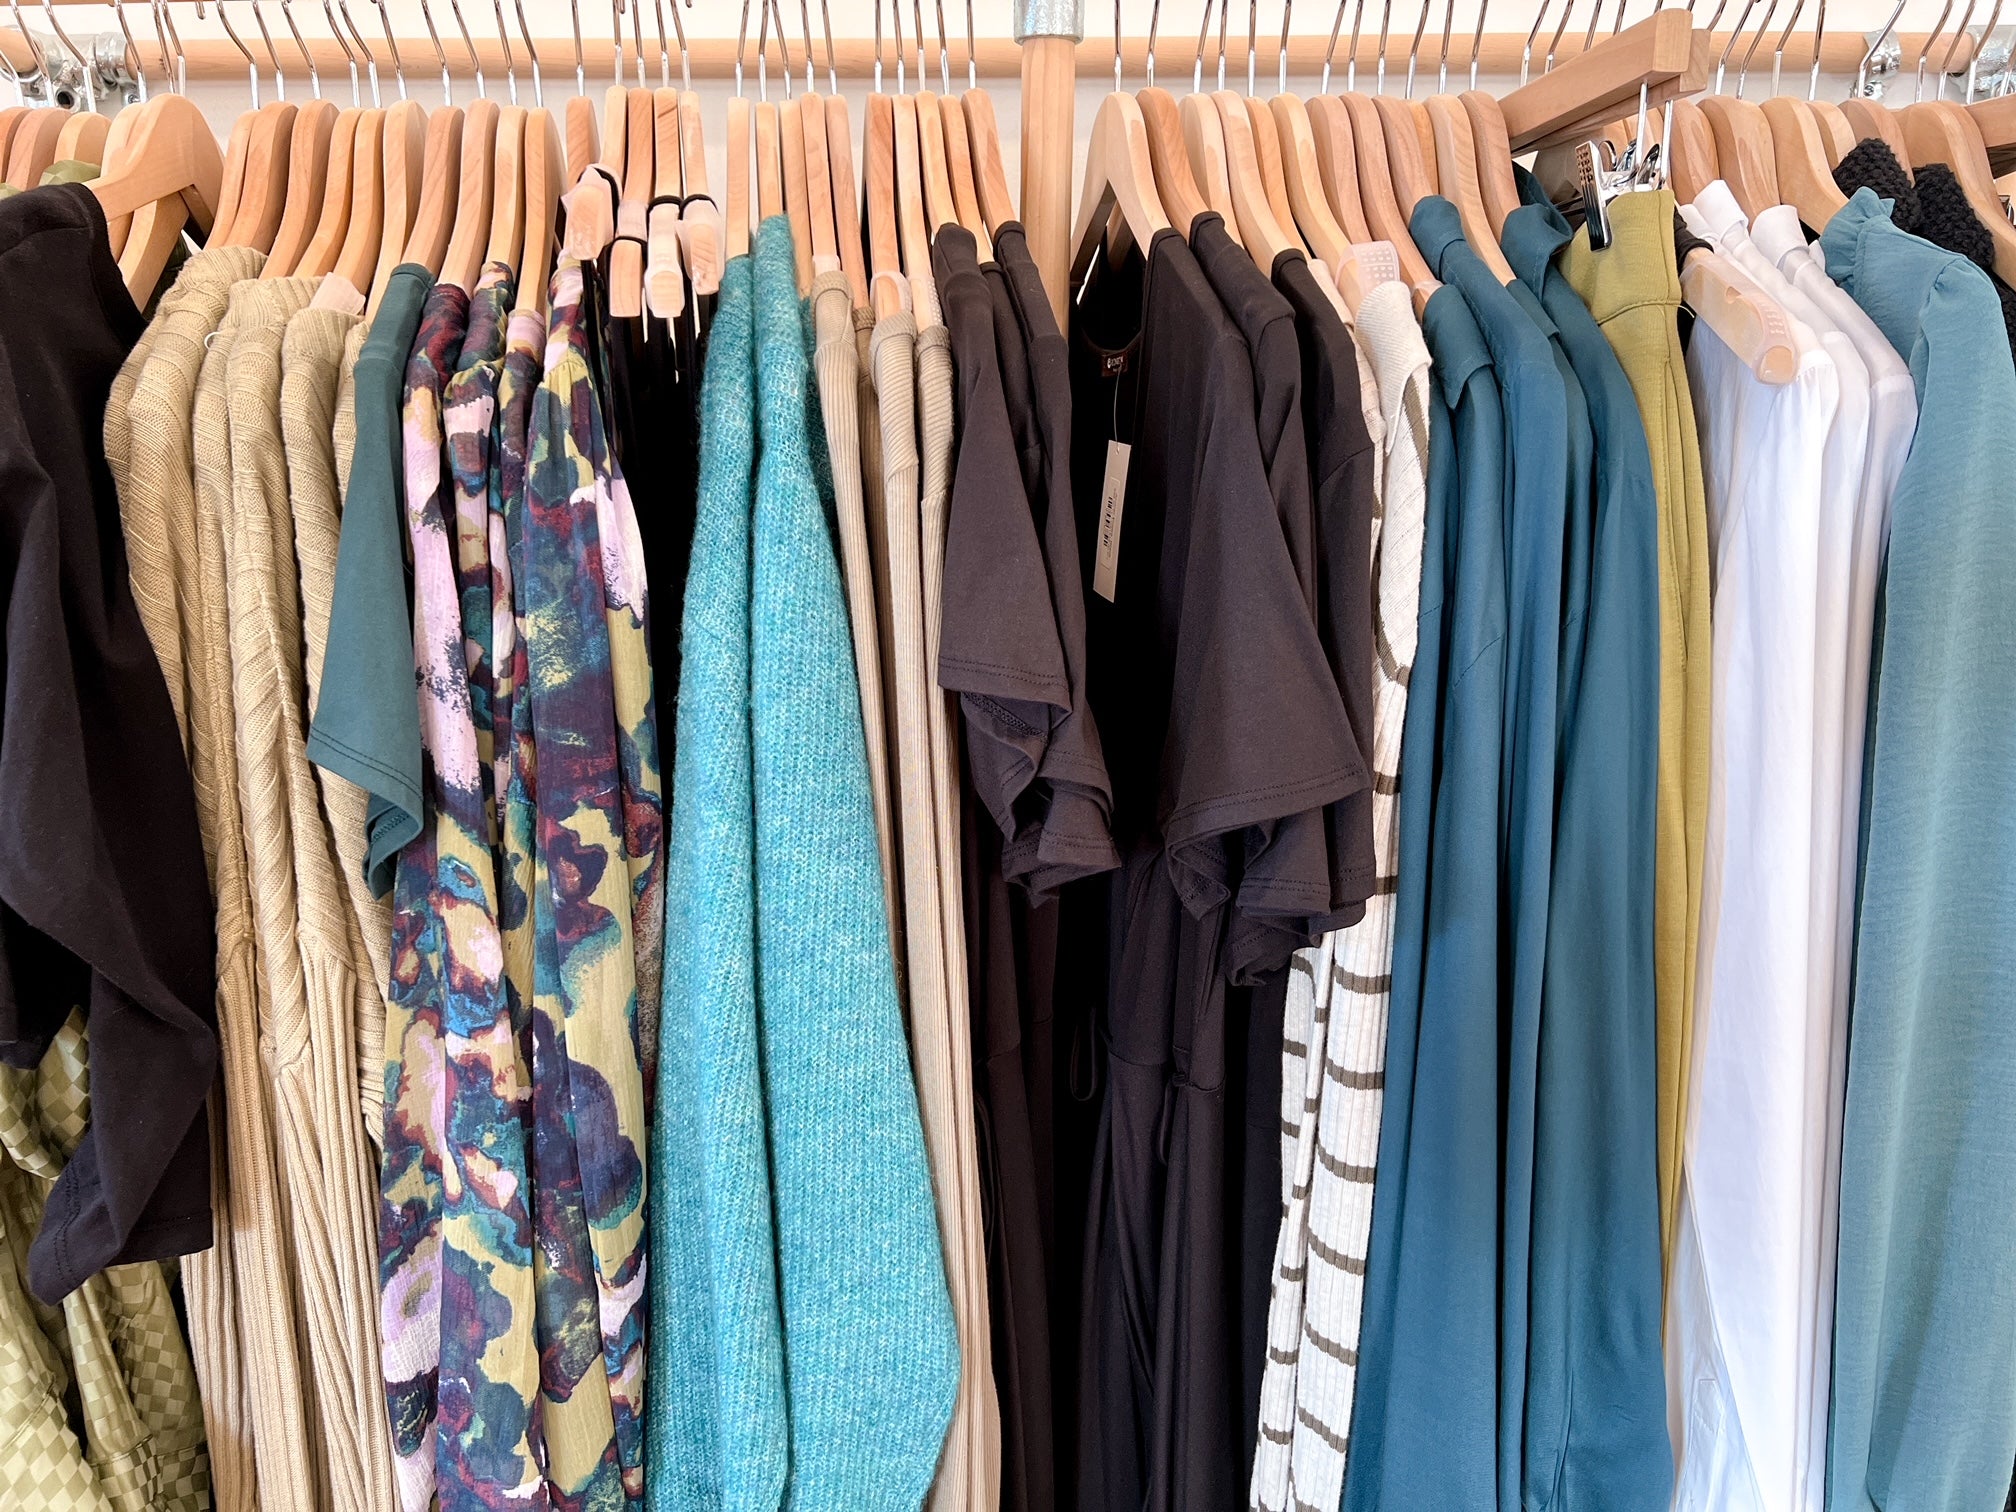 Spring Cleaning? Here Are 5 Ways to Upcycle Your Clothing